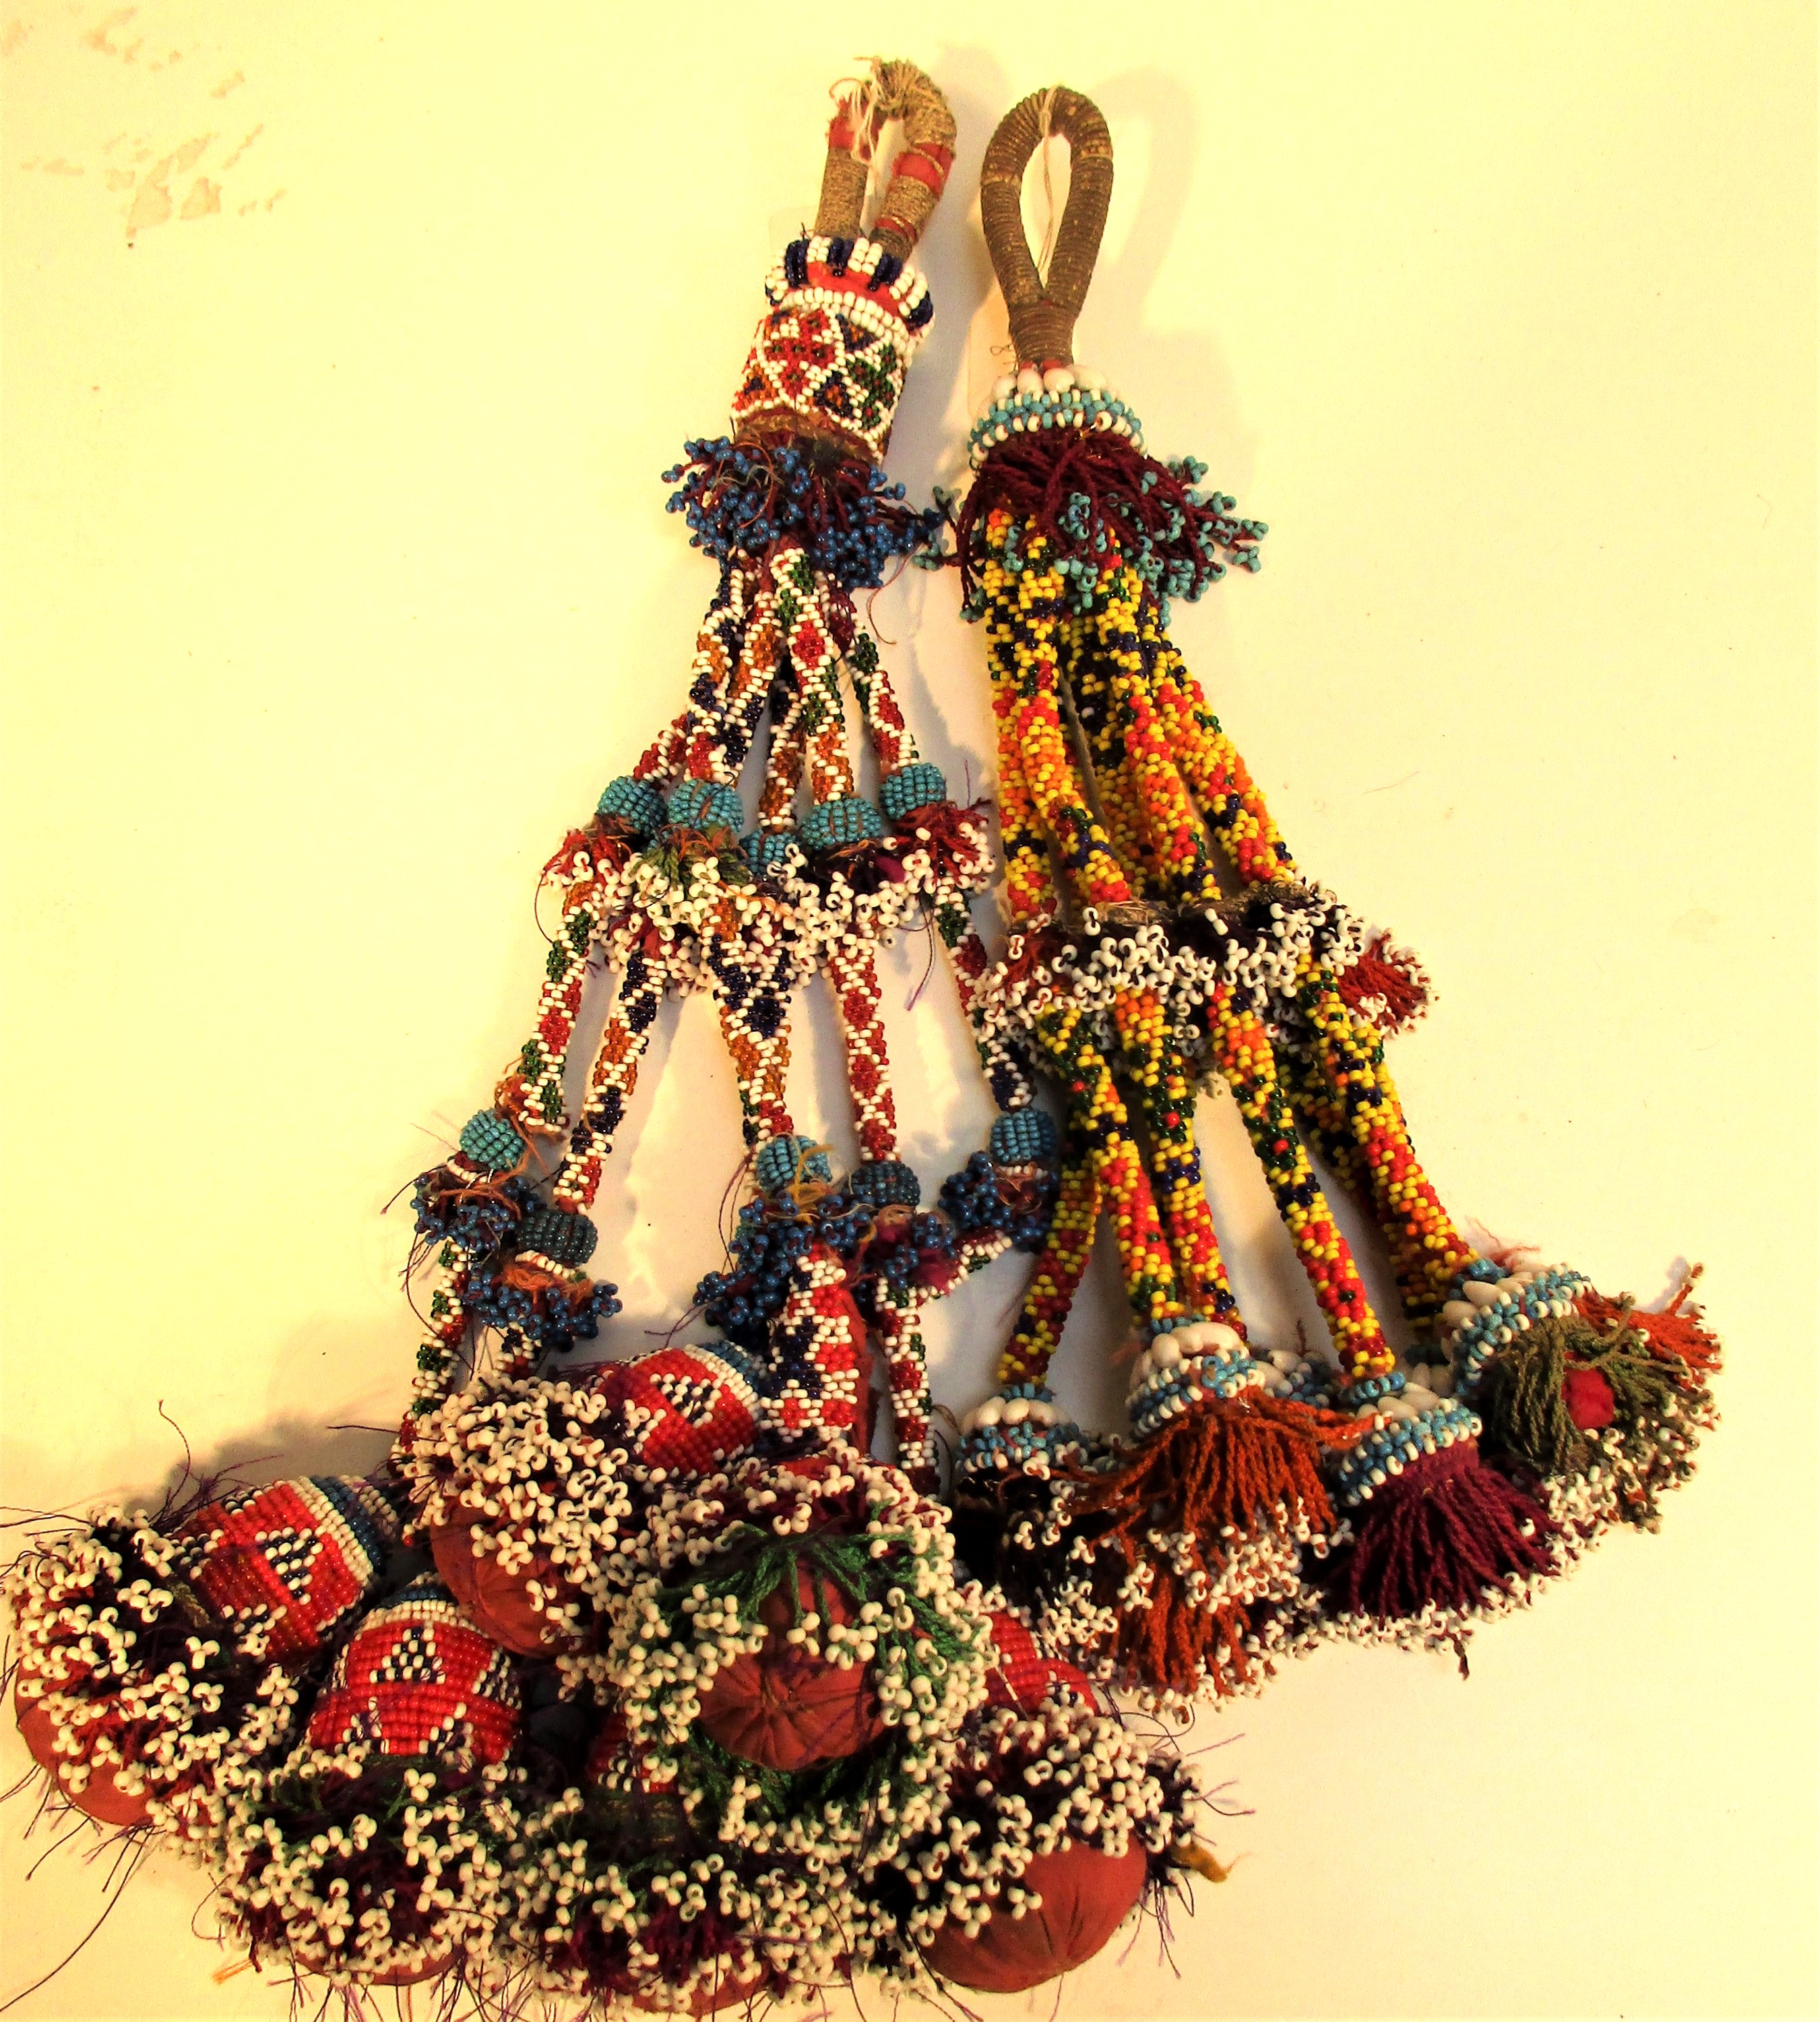 2 x Tassels. North Afghanistan . The art of bead work is popular amongst the Hazara tribes in